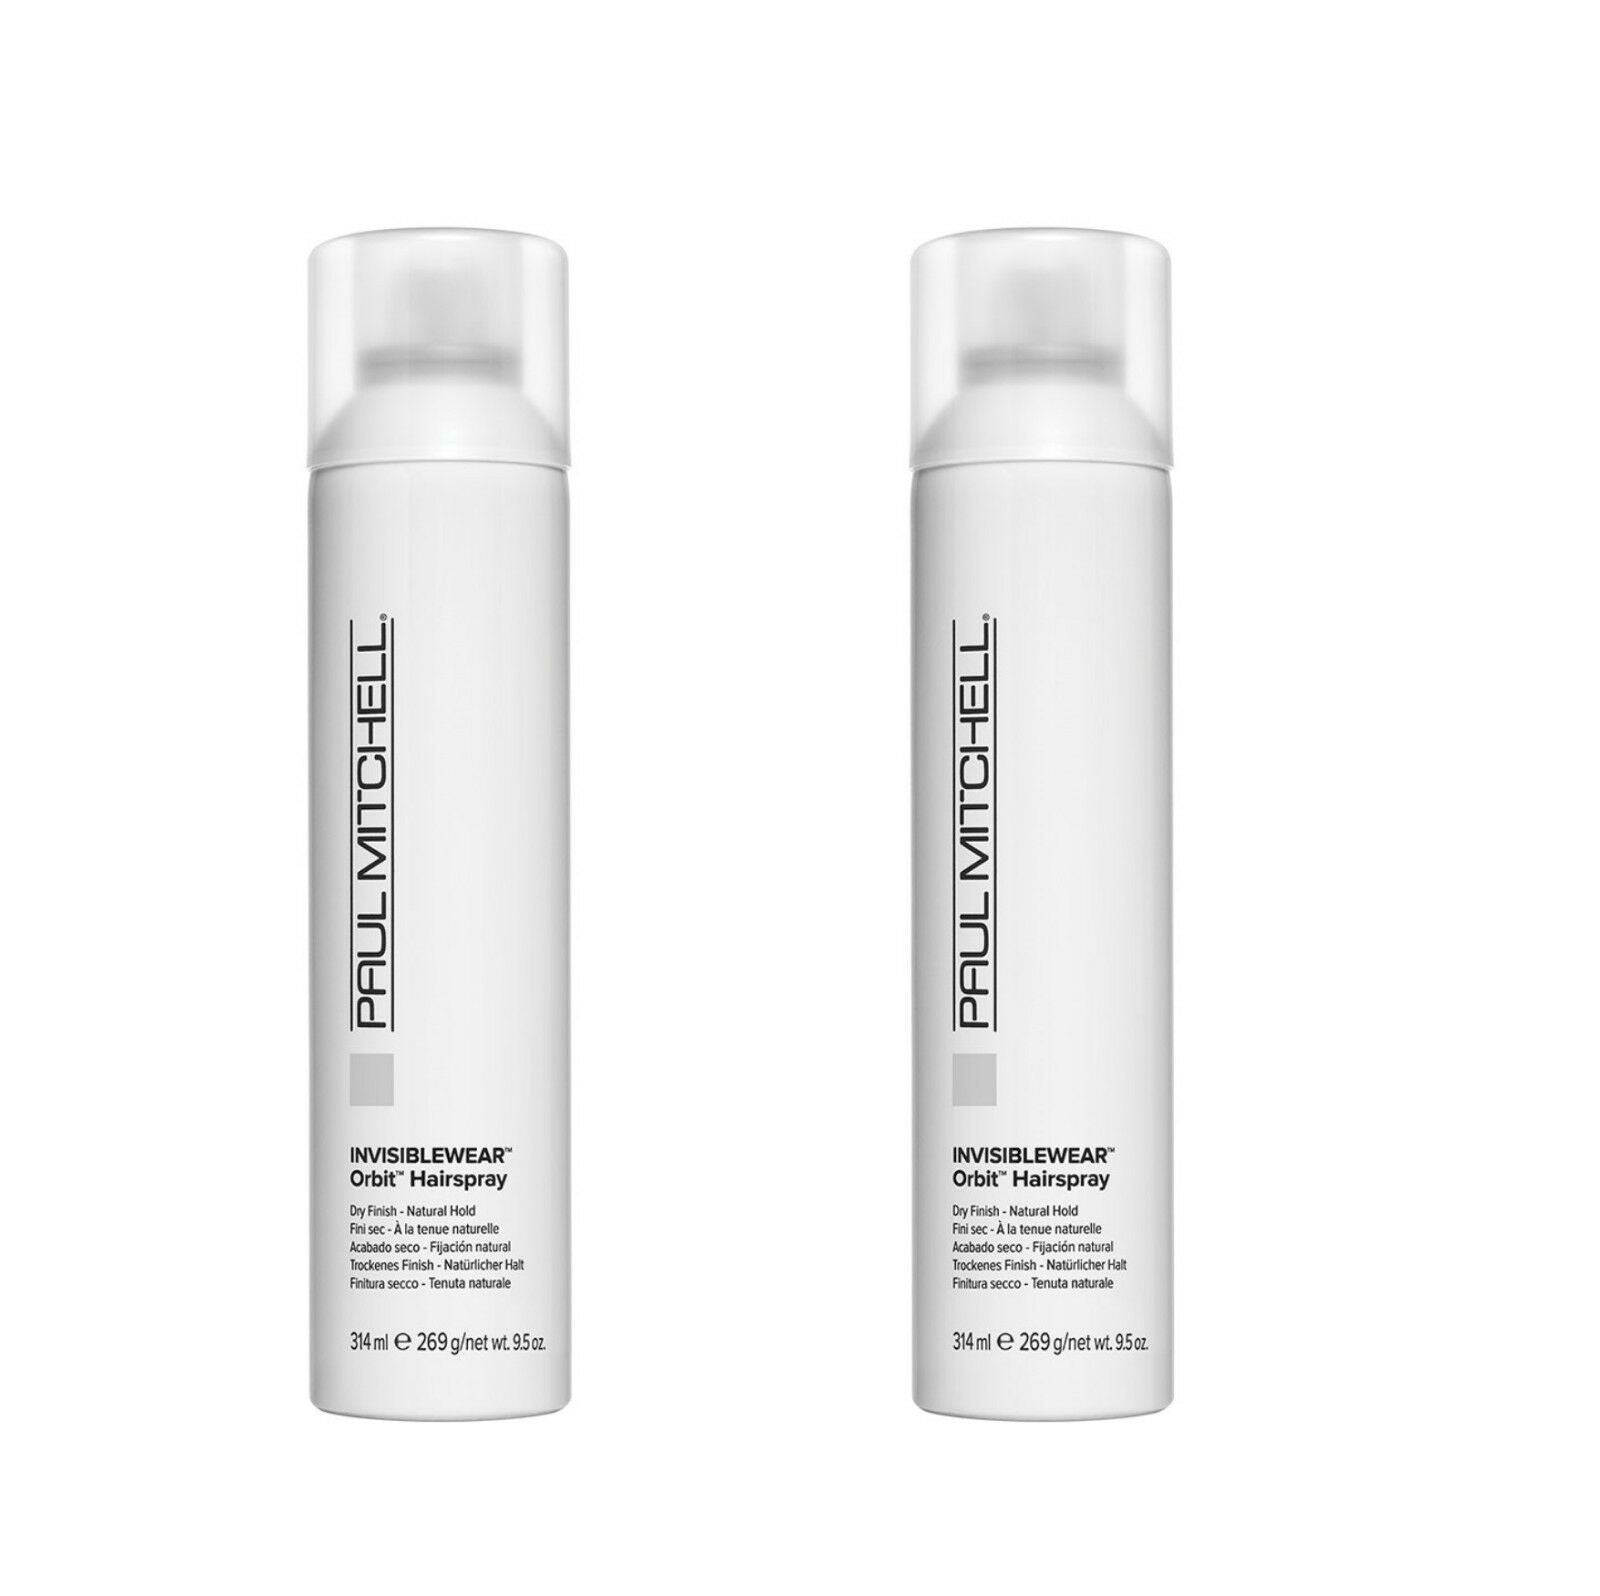 Paul Mitchell Invisiblewear Orbit Hairspray Finishing Natural Hold Duo 224ml x 2 - On Line Hair Depot